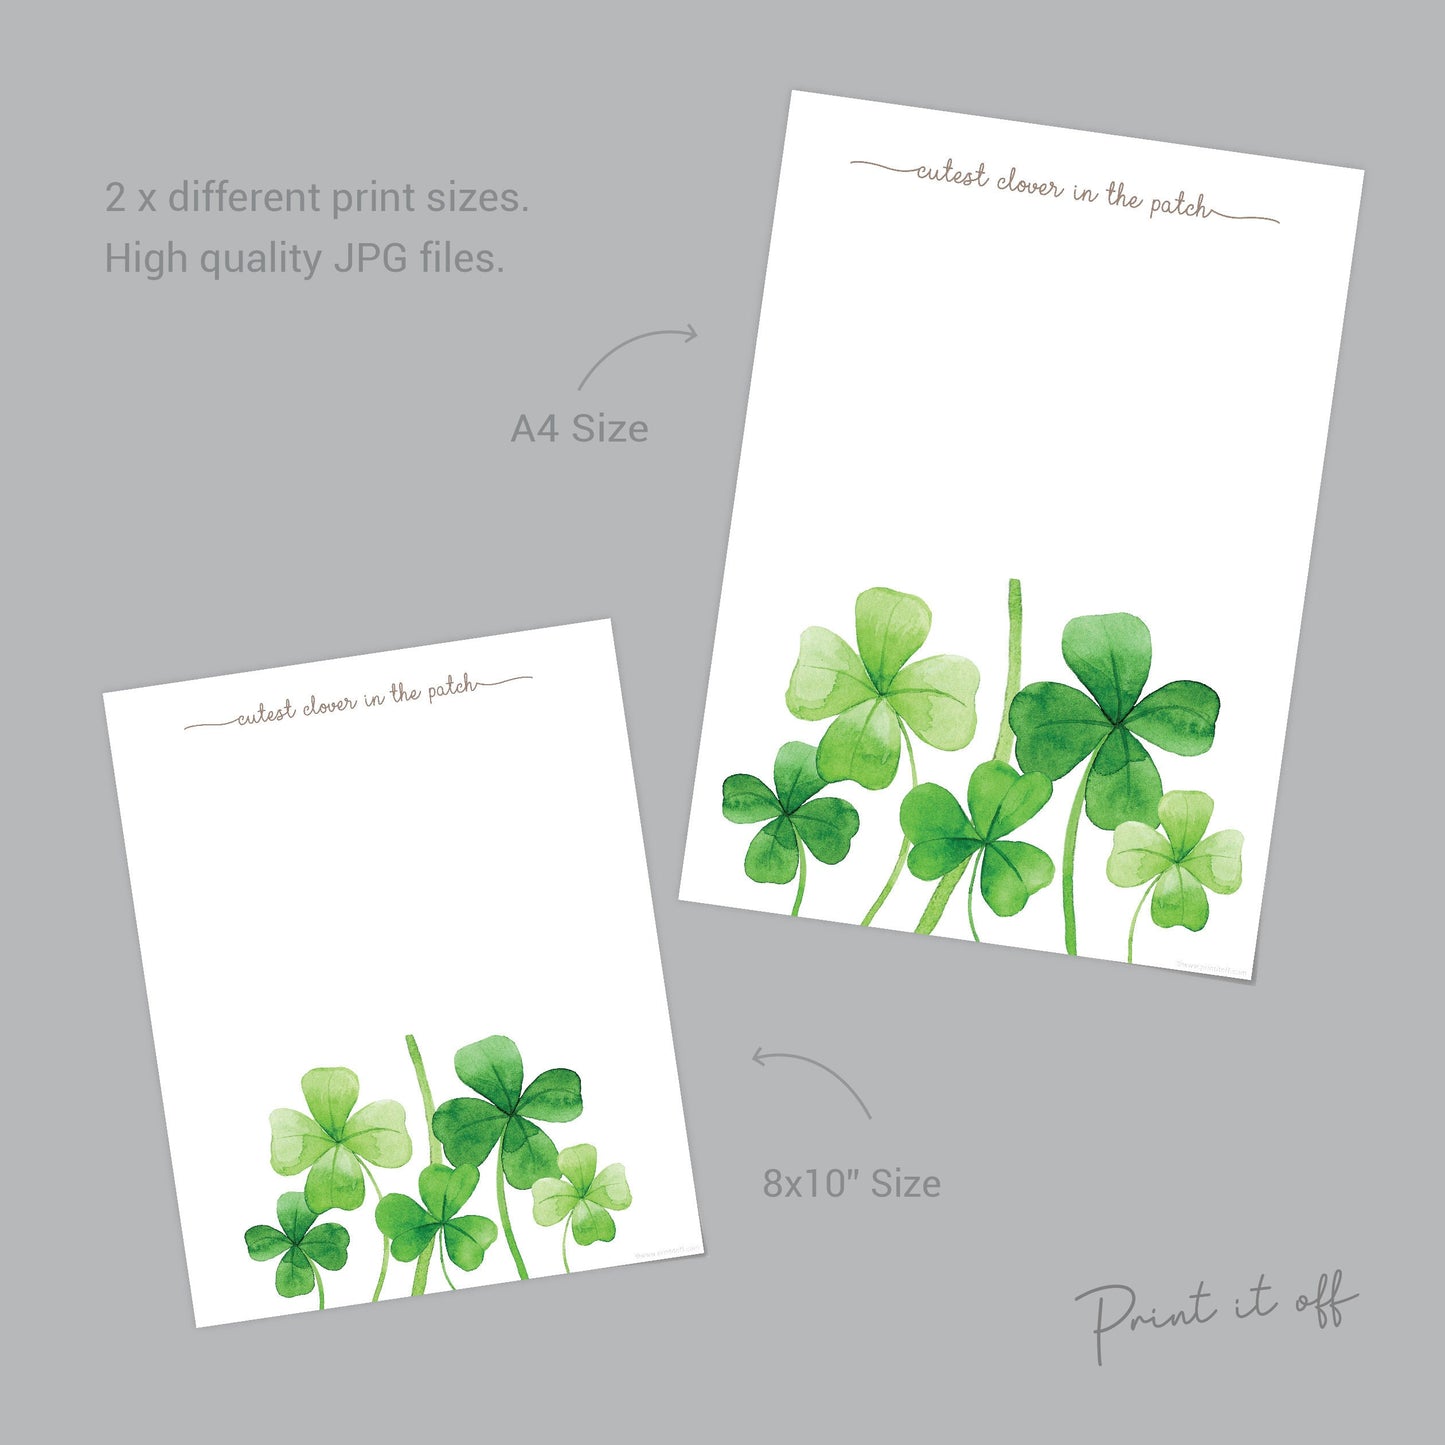 Clover Shamrock Handprint St Patrick's Day Craft Art / Cutest in the Patch / DIY Card Baby Kids Hand Printable / Print it Off 0693